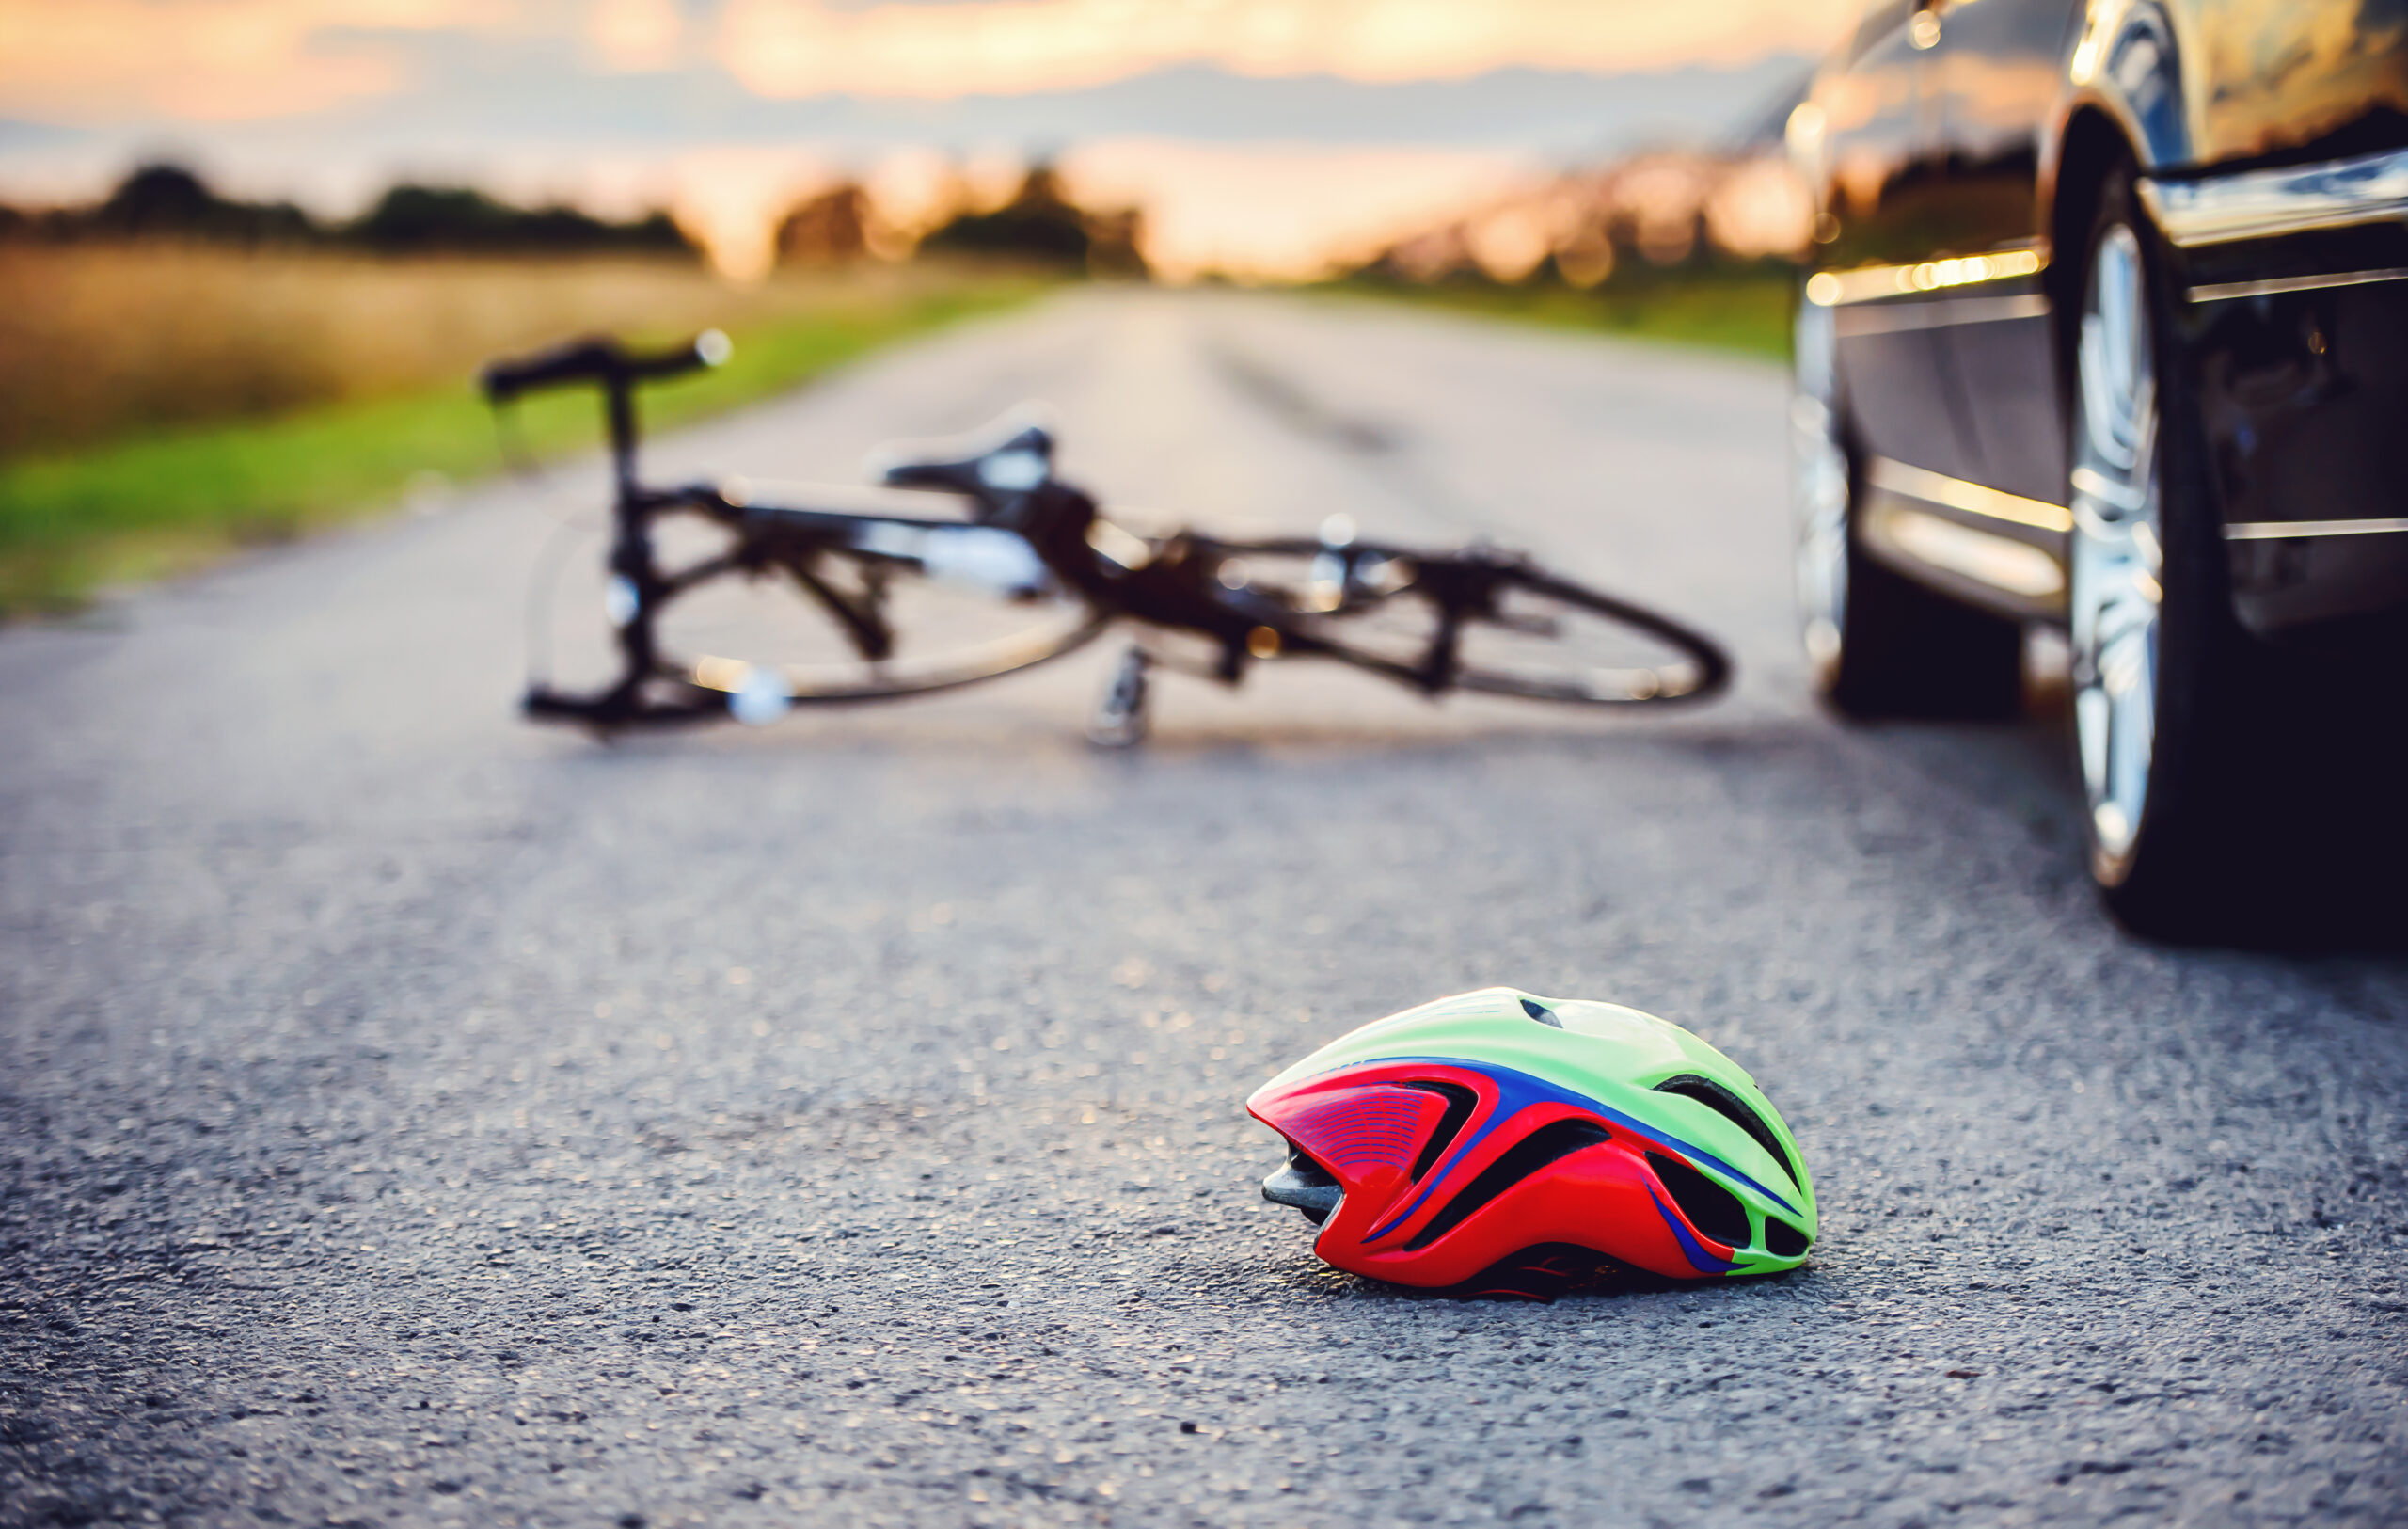 Traffic accident between bicycle and car. Bicycle accidents are dangerous.